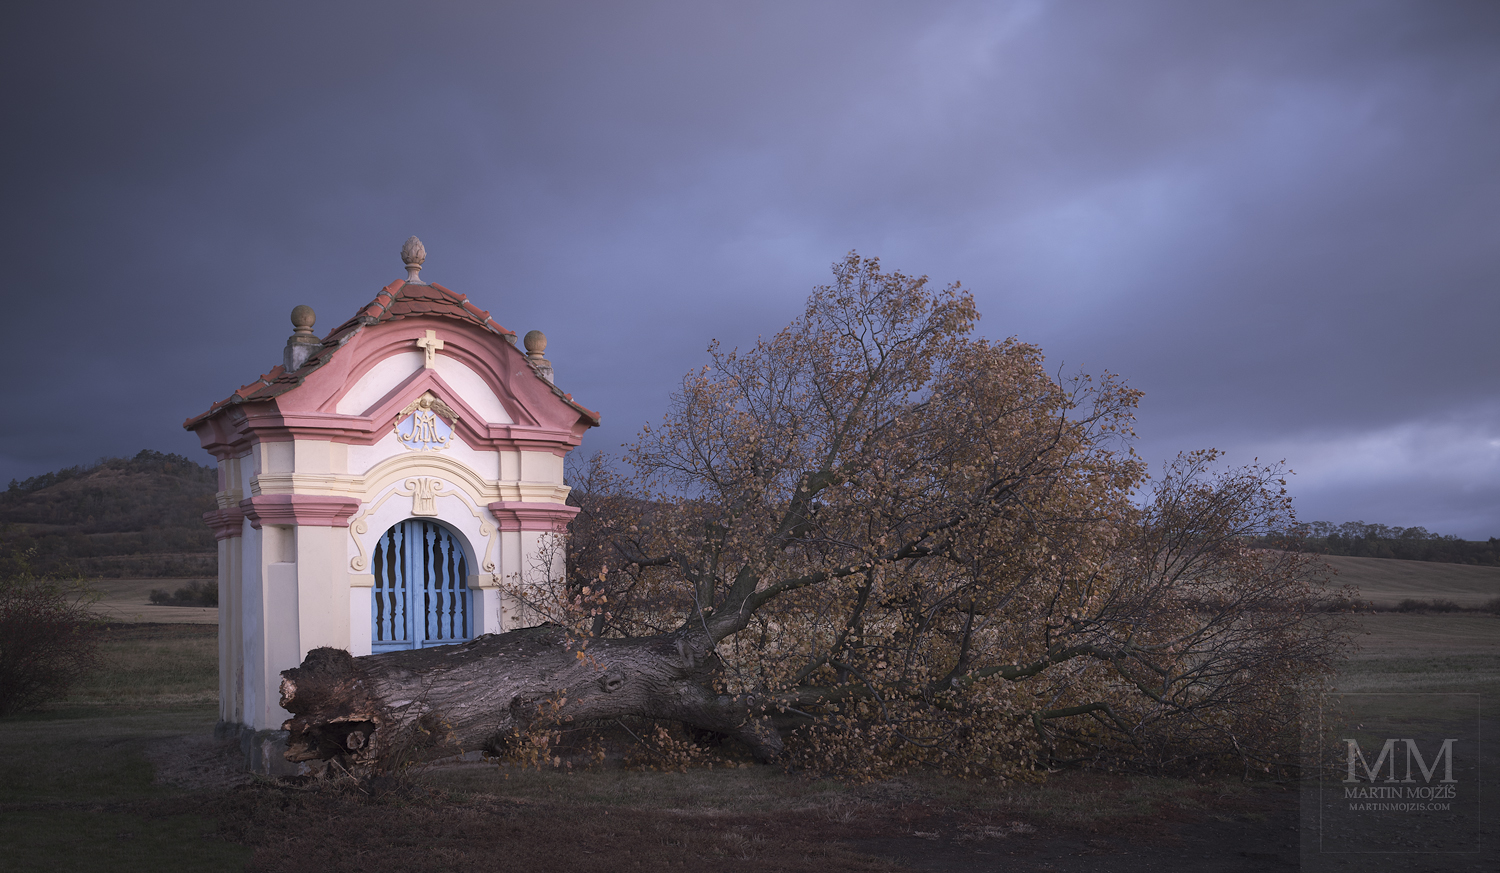 A fallen tree in front of a chapel in a landscape. Fine art photograph AFTER A BIG WIND, photographed by Martin Mojzis.